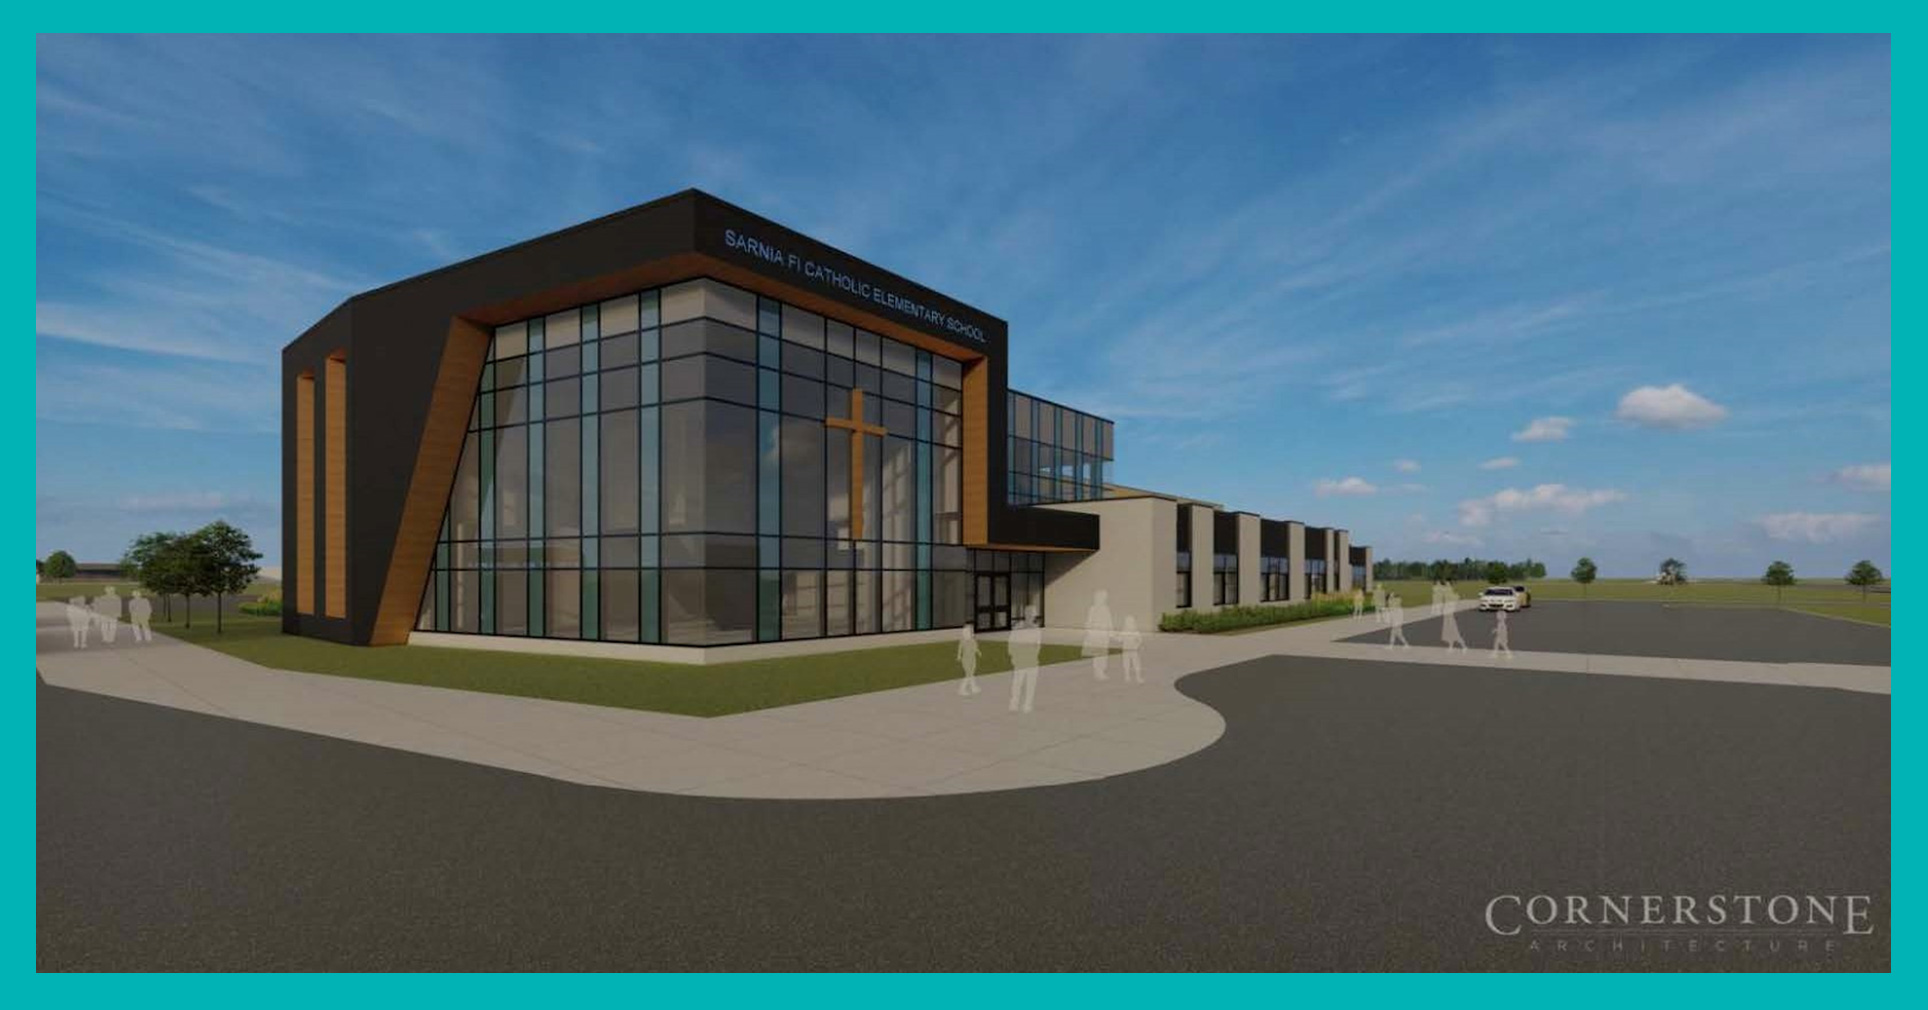 Design of New Gregory A. Hogan Catholic School in Sarnia Presented to Board of Trustees